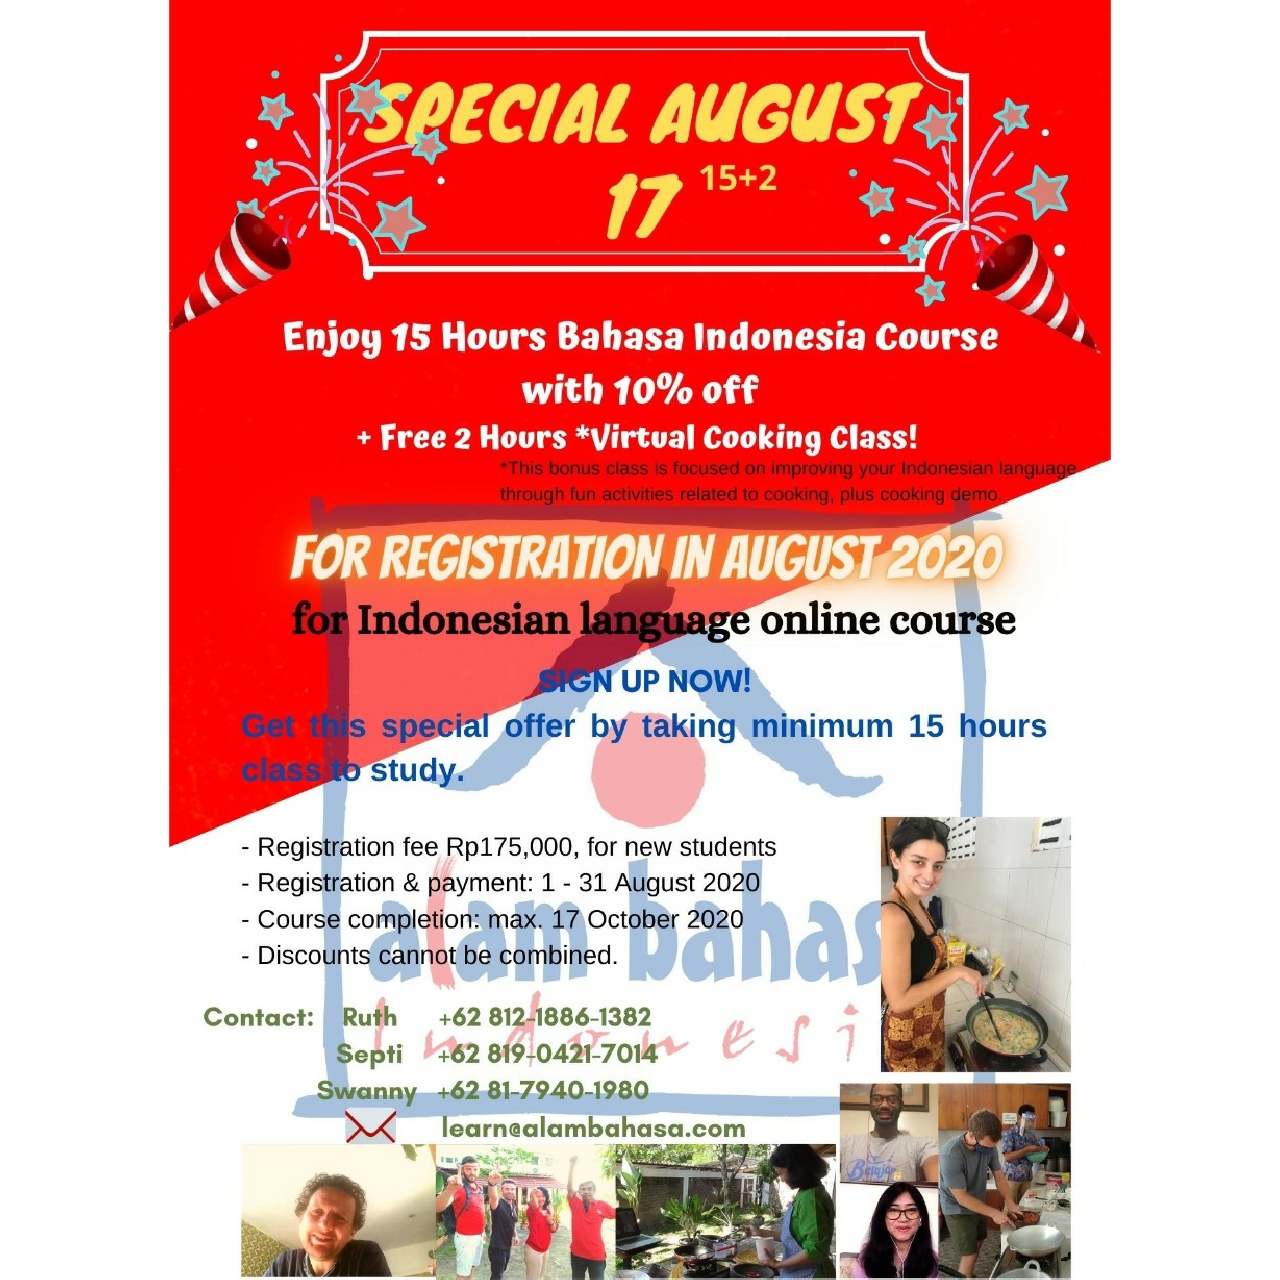 SPECIAL AUGUST 17